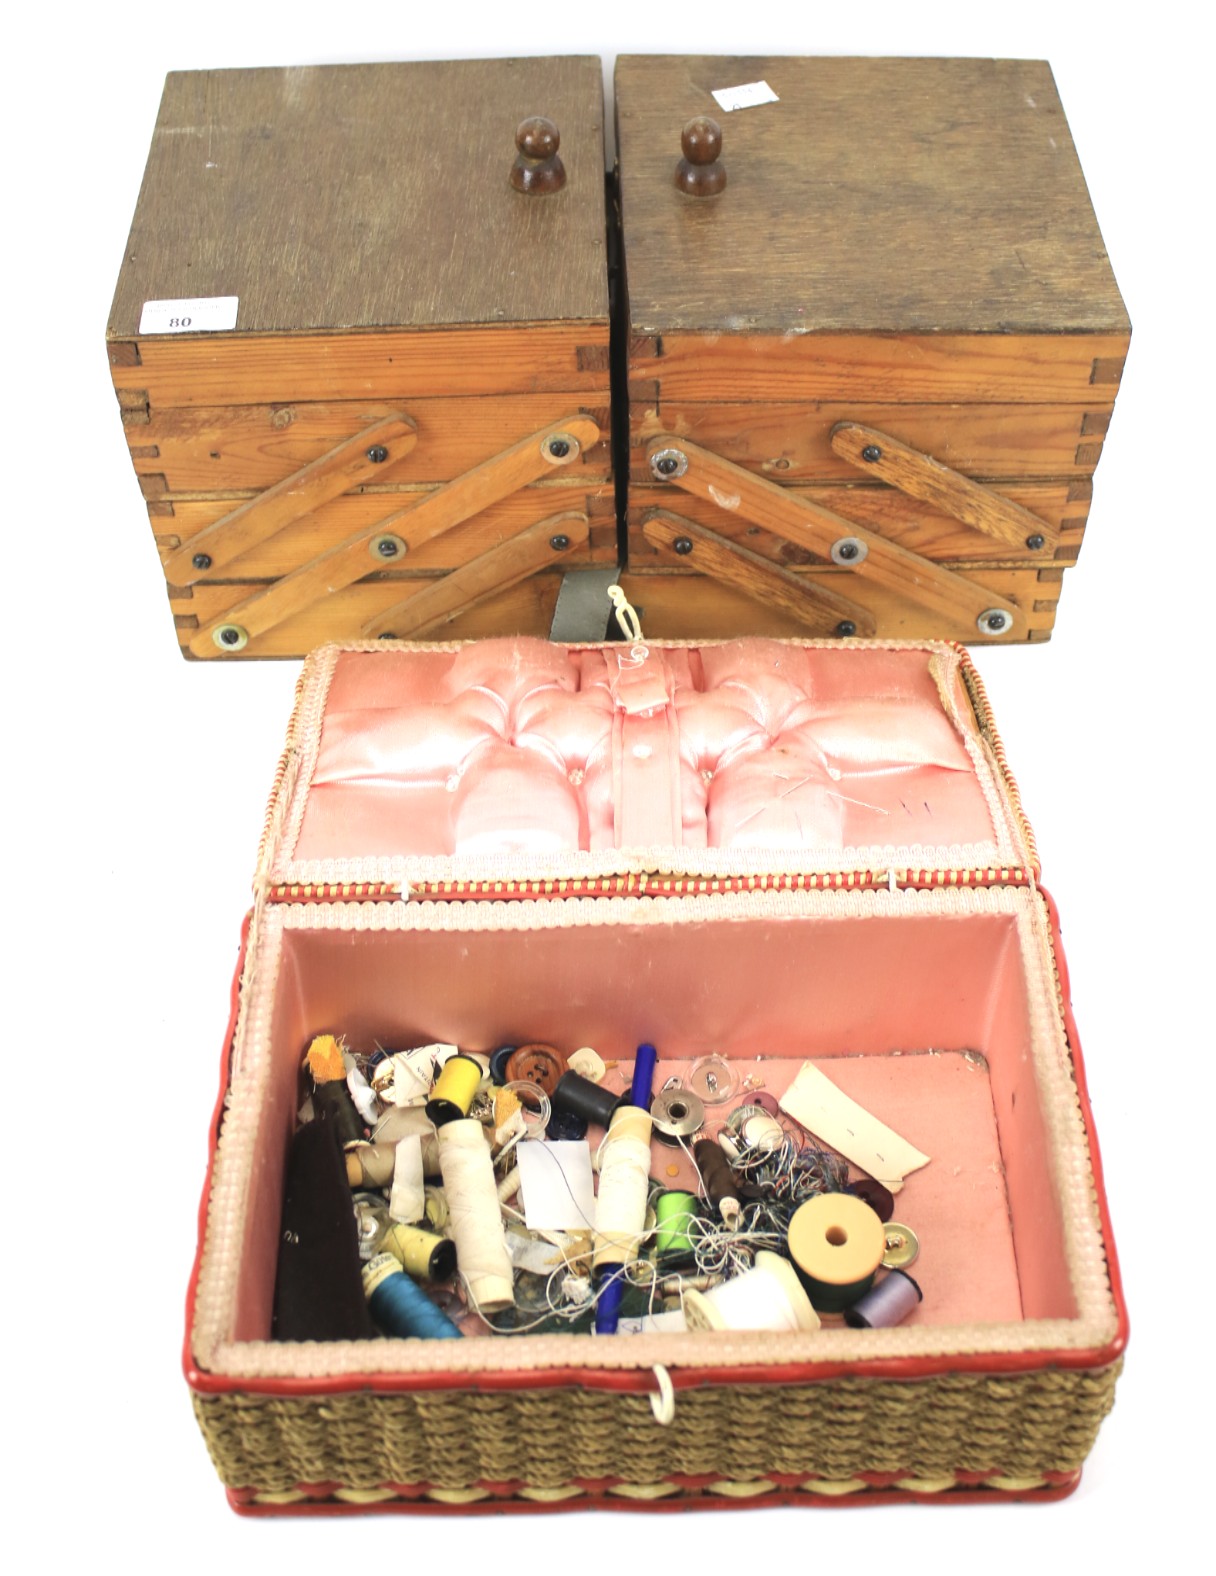 A vintage pine cantilevered sewing box and a wicker sewing basket and contents.